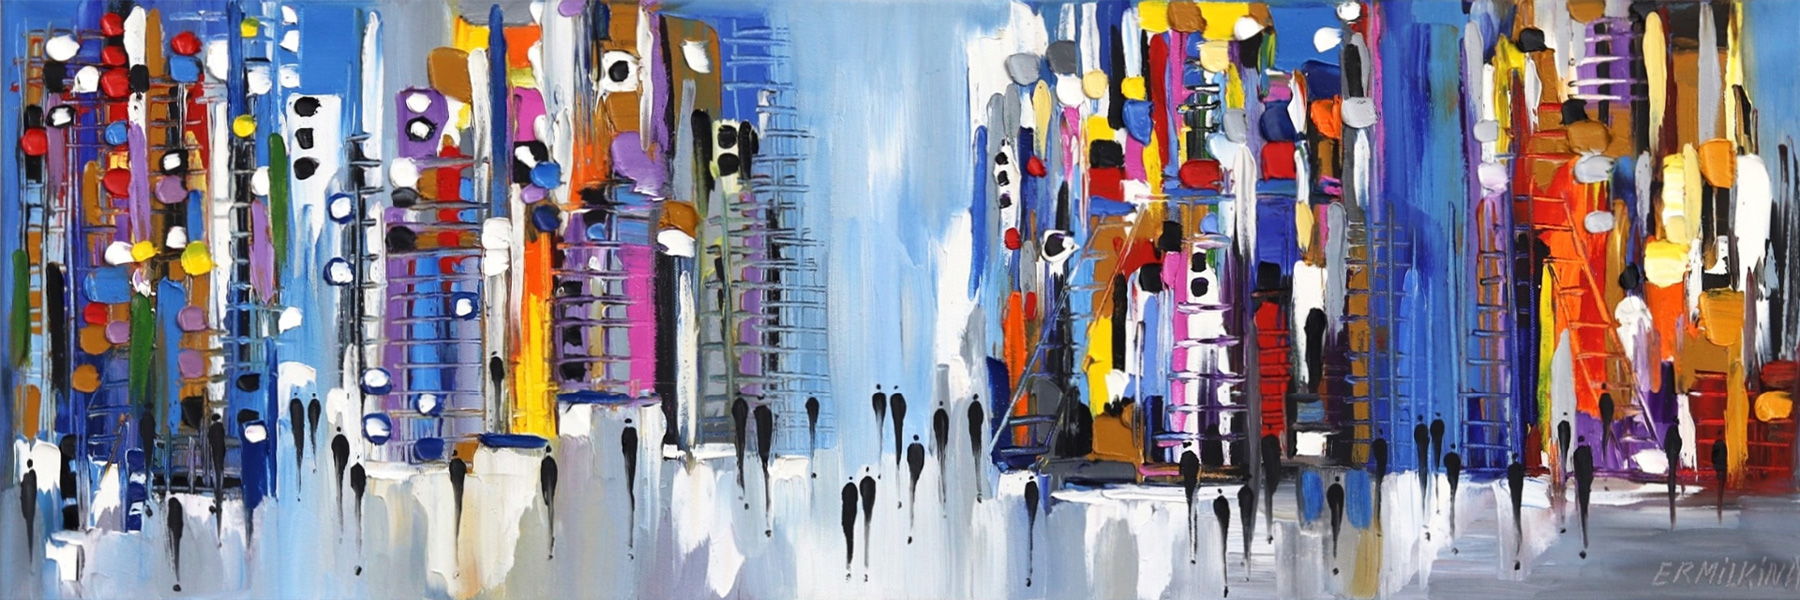 Painting by Ekaterina Ermilkina, titled Charming City